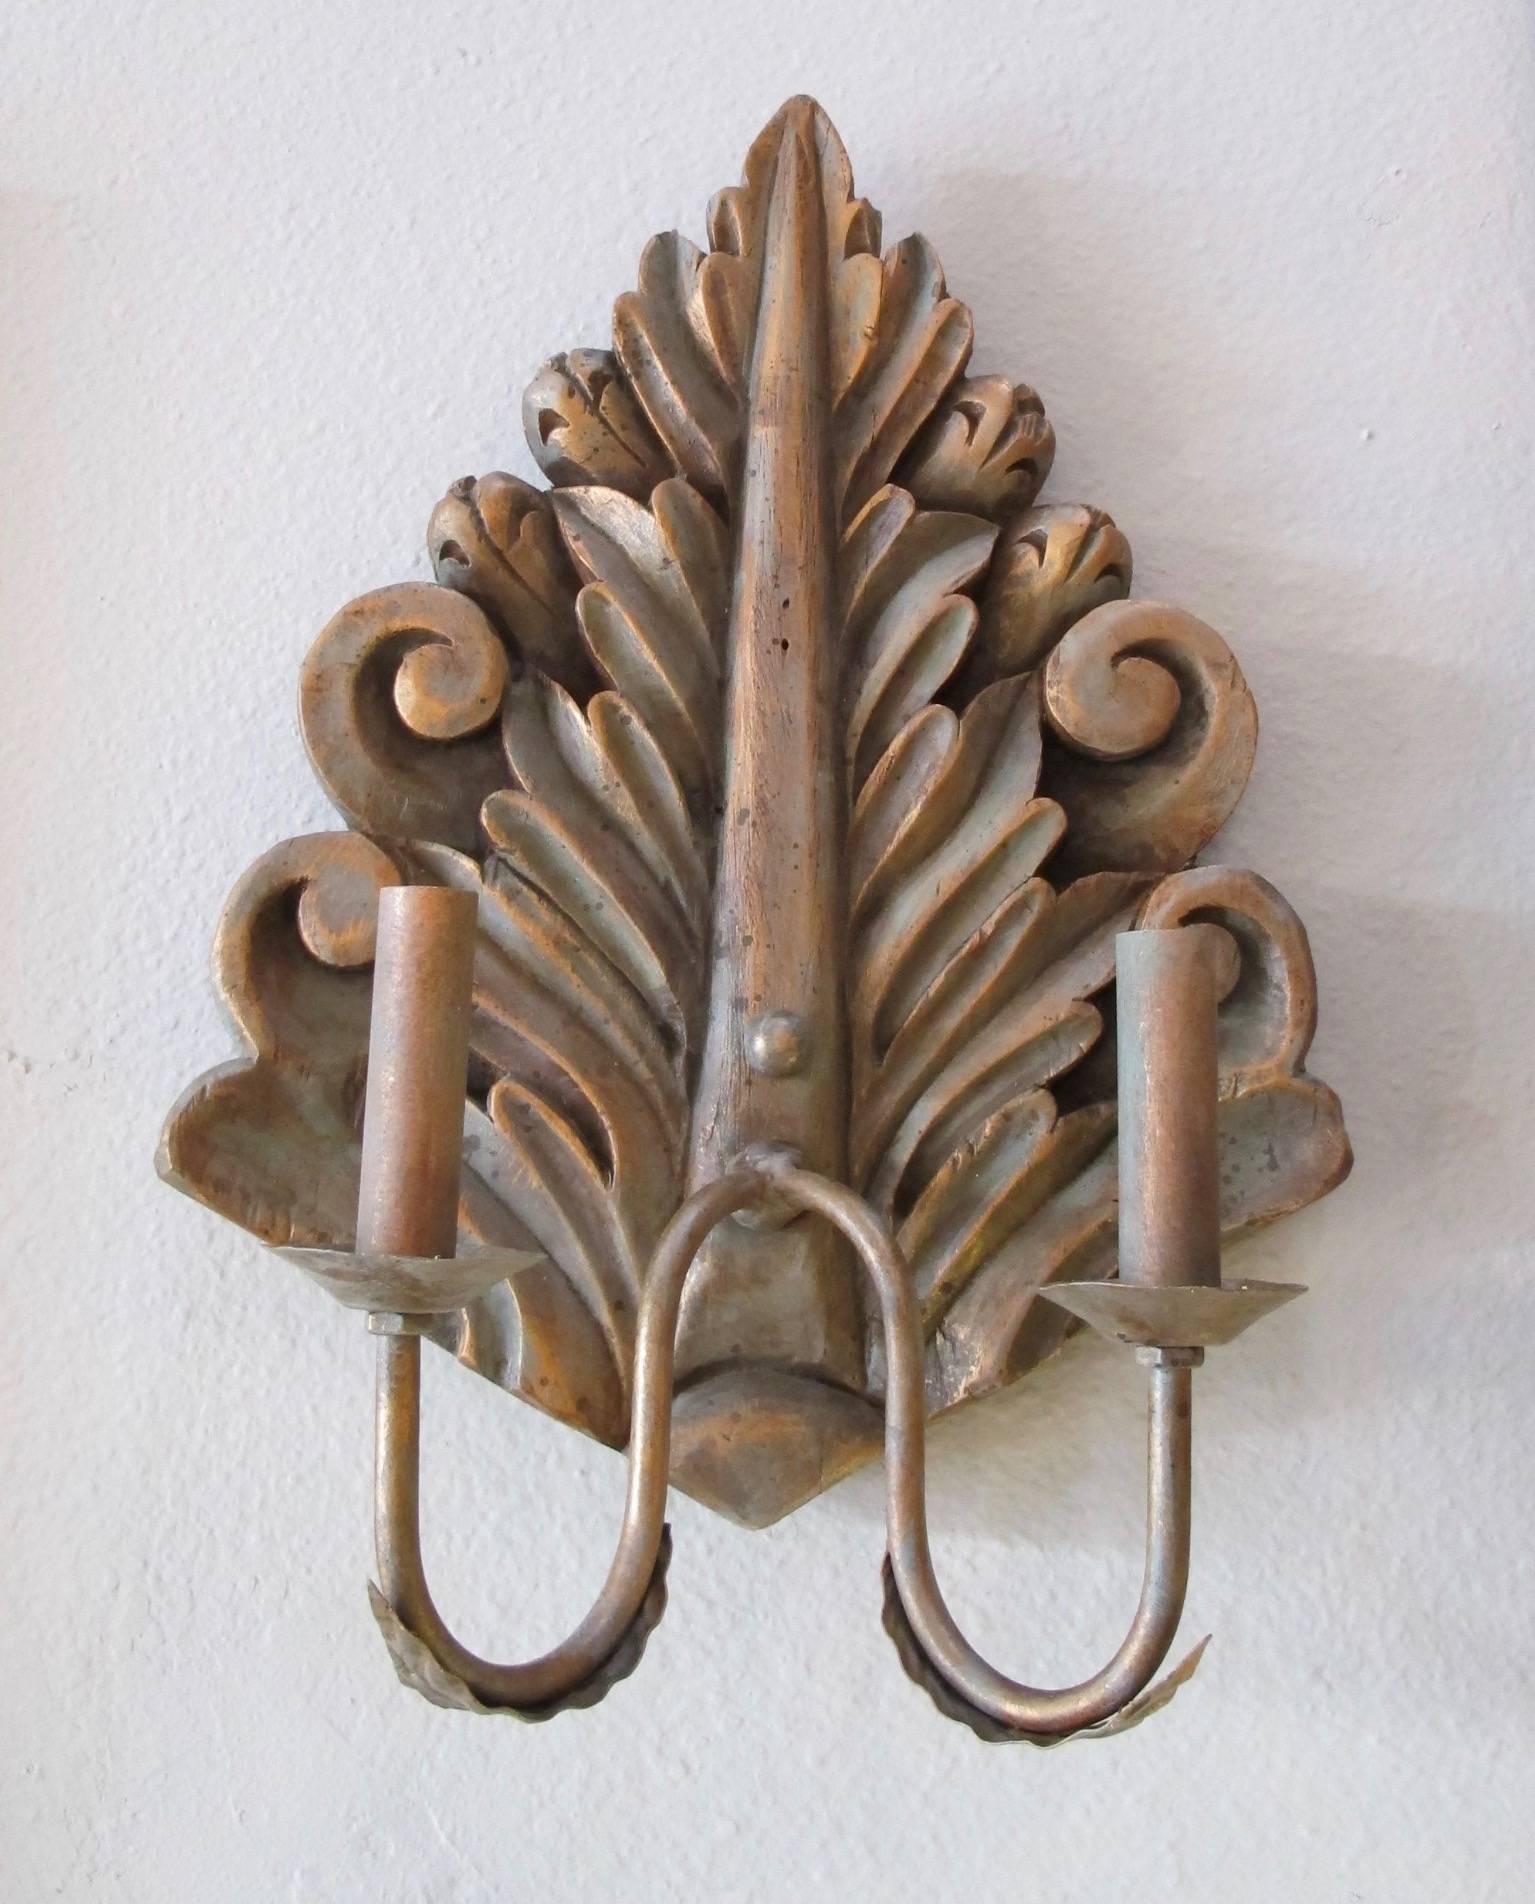 American ON SALE! Pair of Hand-Carved Wood Sconces